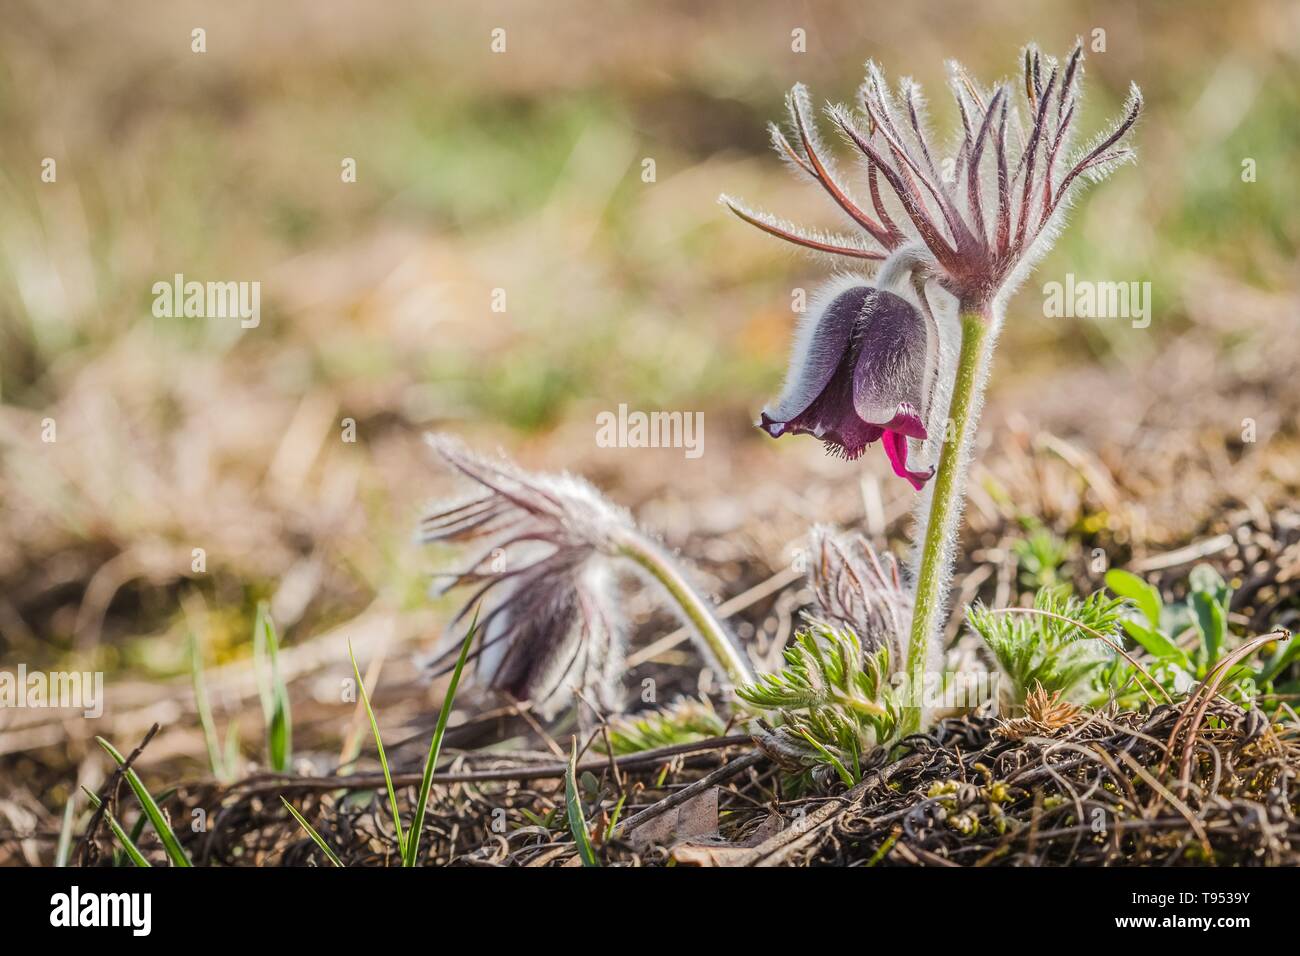 Fresh meadow anemone, also called small pasque flower with dark purple cup like flowers and hairy stalk growing in a gravelly meadow. Sunny day. Stock Photo